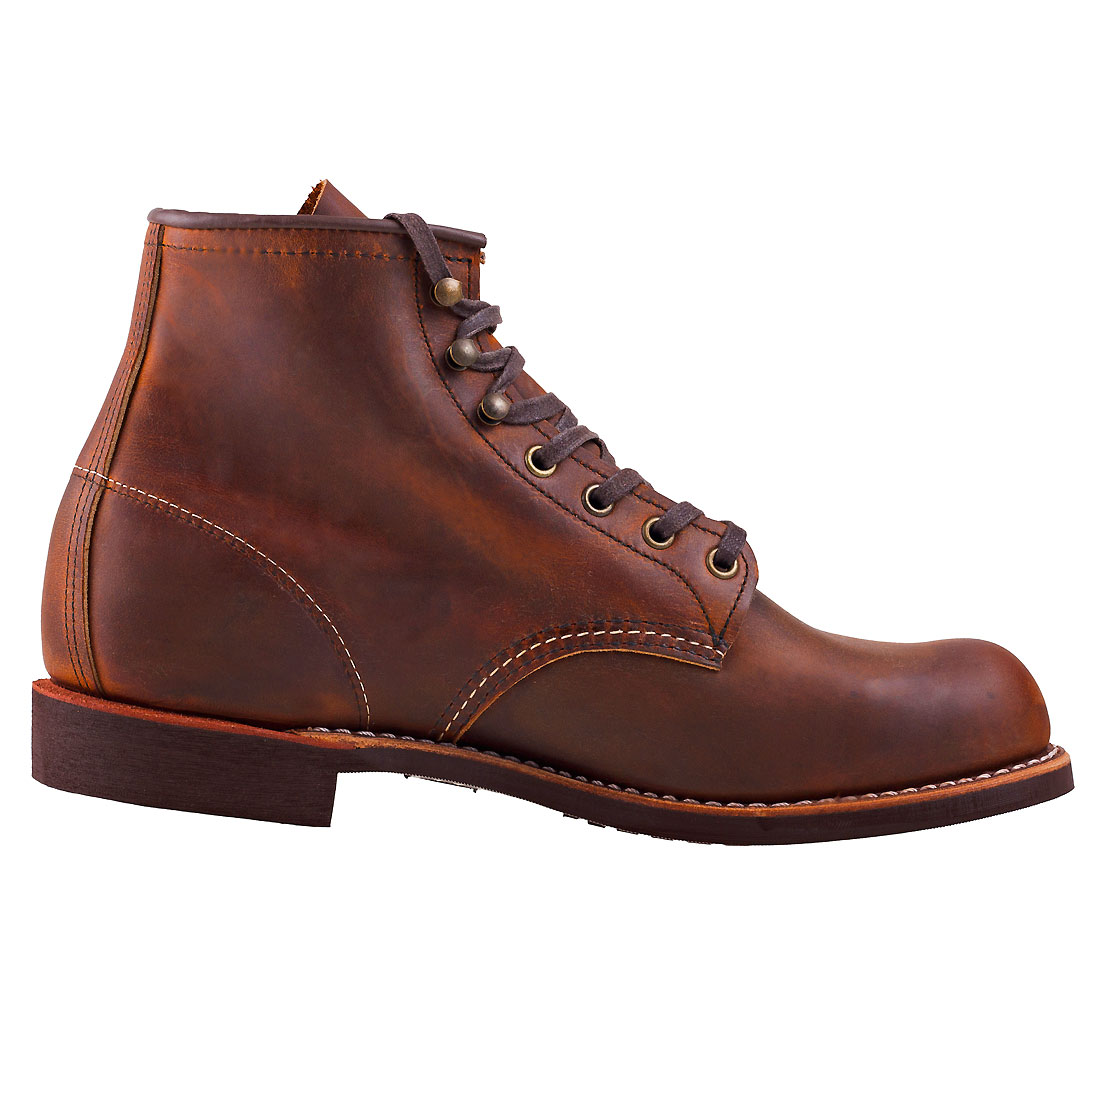 Red Wing Blacksmith Heritage Mens Tan Leather Casual Boots Lace-up New ...